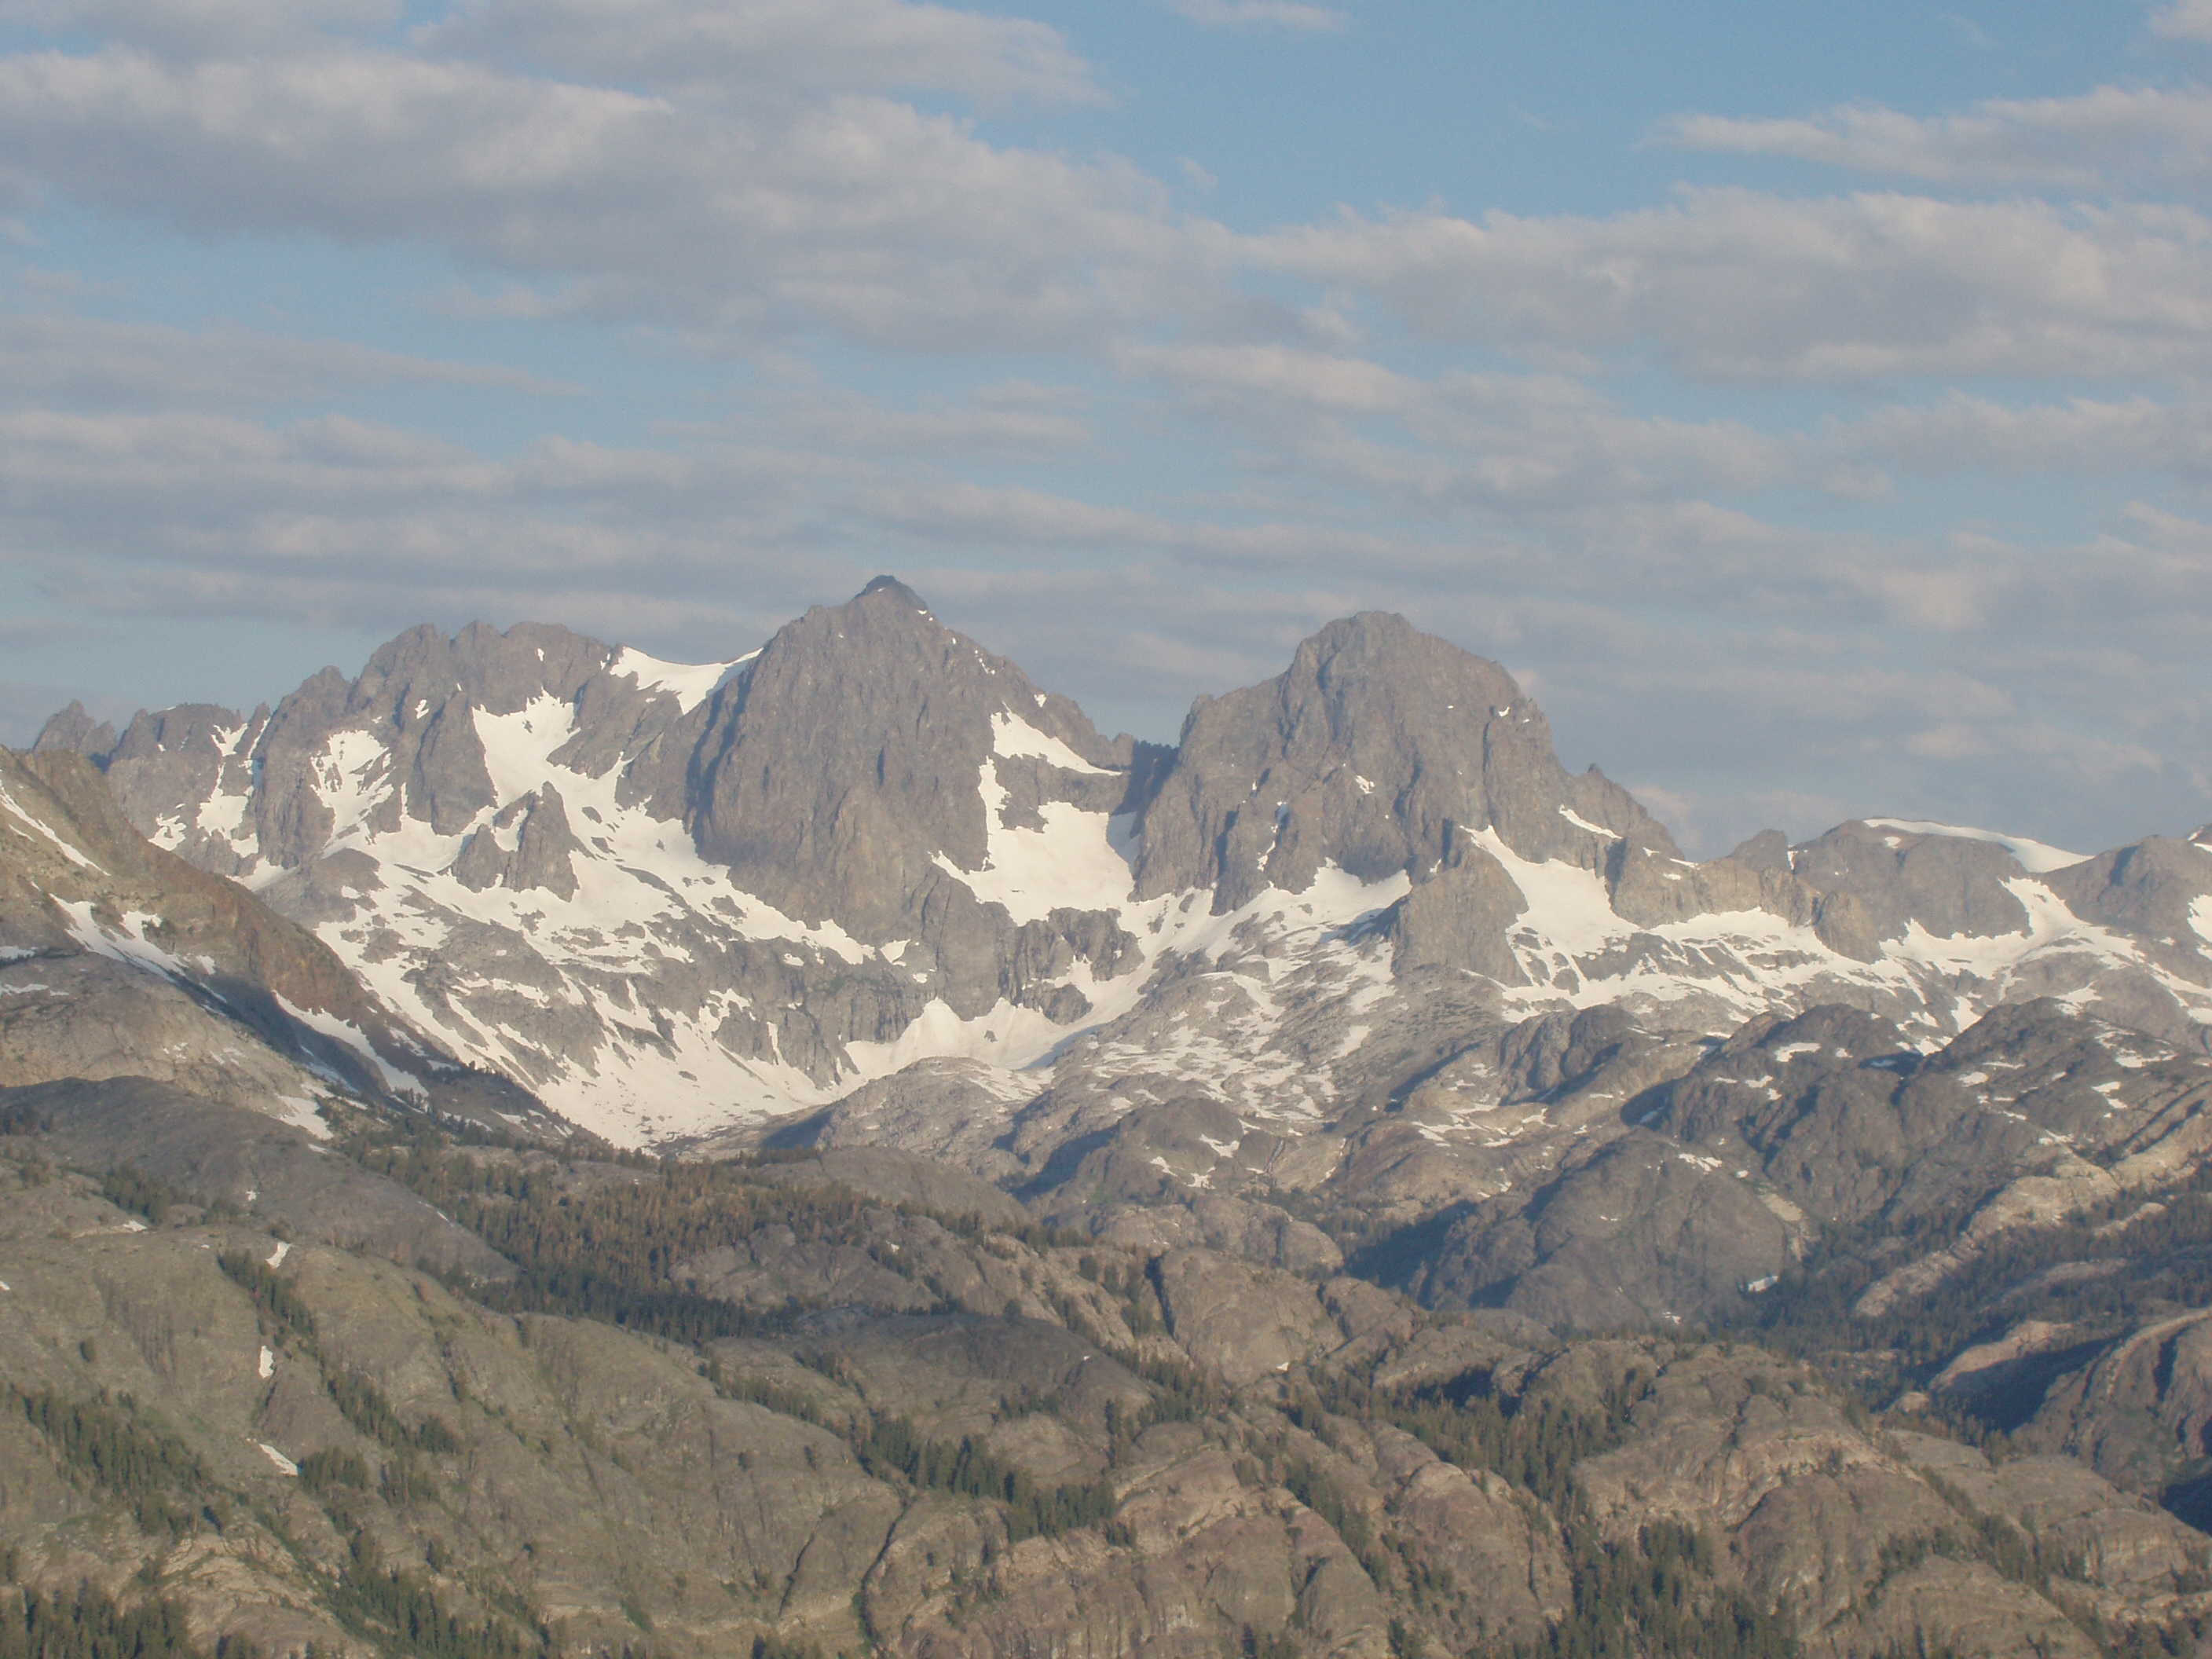 Mount Ritter and Mount Banner